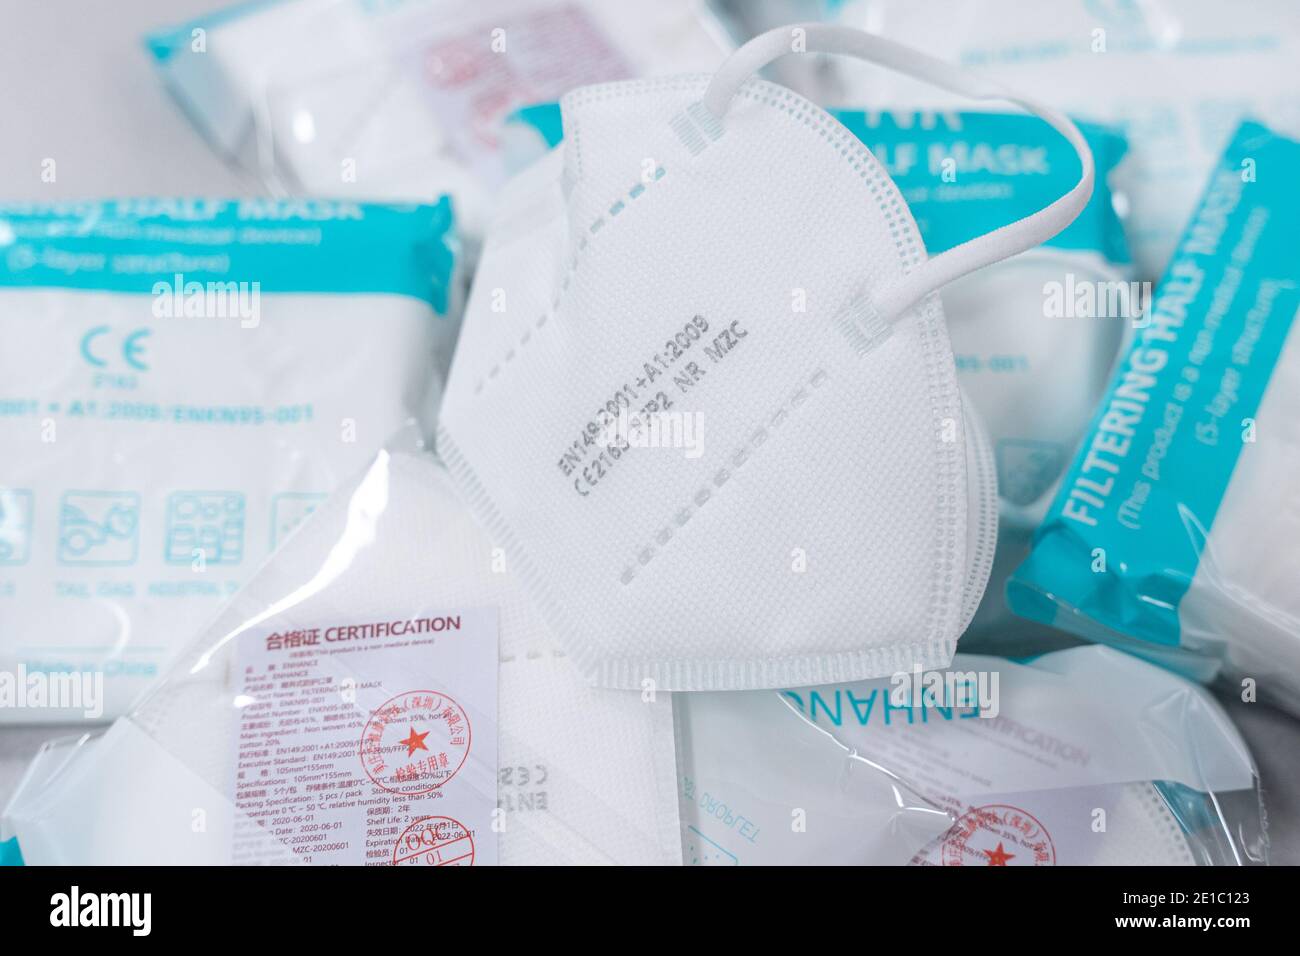 NIJMEGEN, NETHERLANDS - JANUARY 2: Unpackaged FFP2 bwetween packaged FFP2 masks. FFP2 can serve as protection against covid-19. on January 2, 2021 in Stock Photo